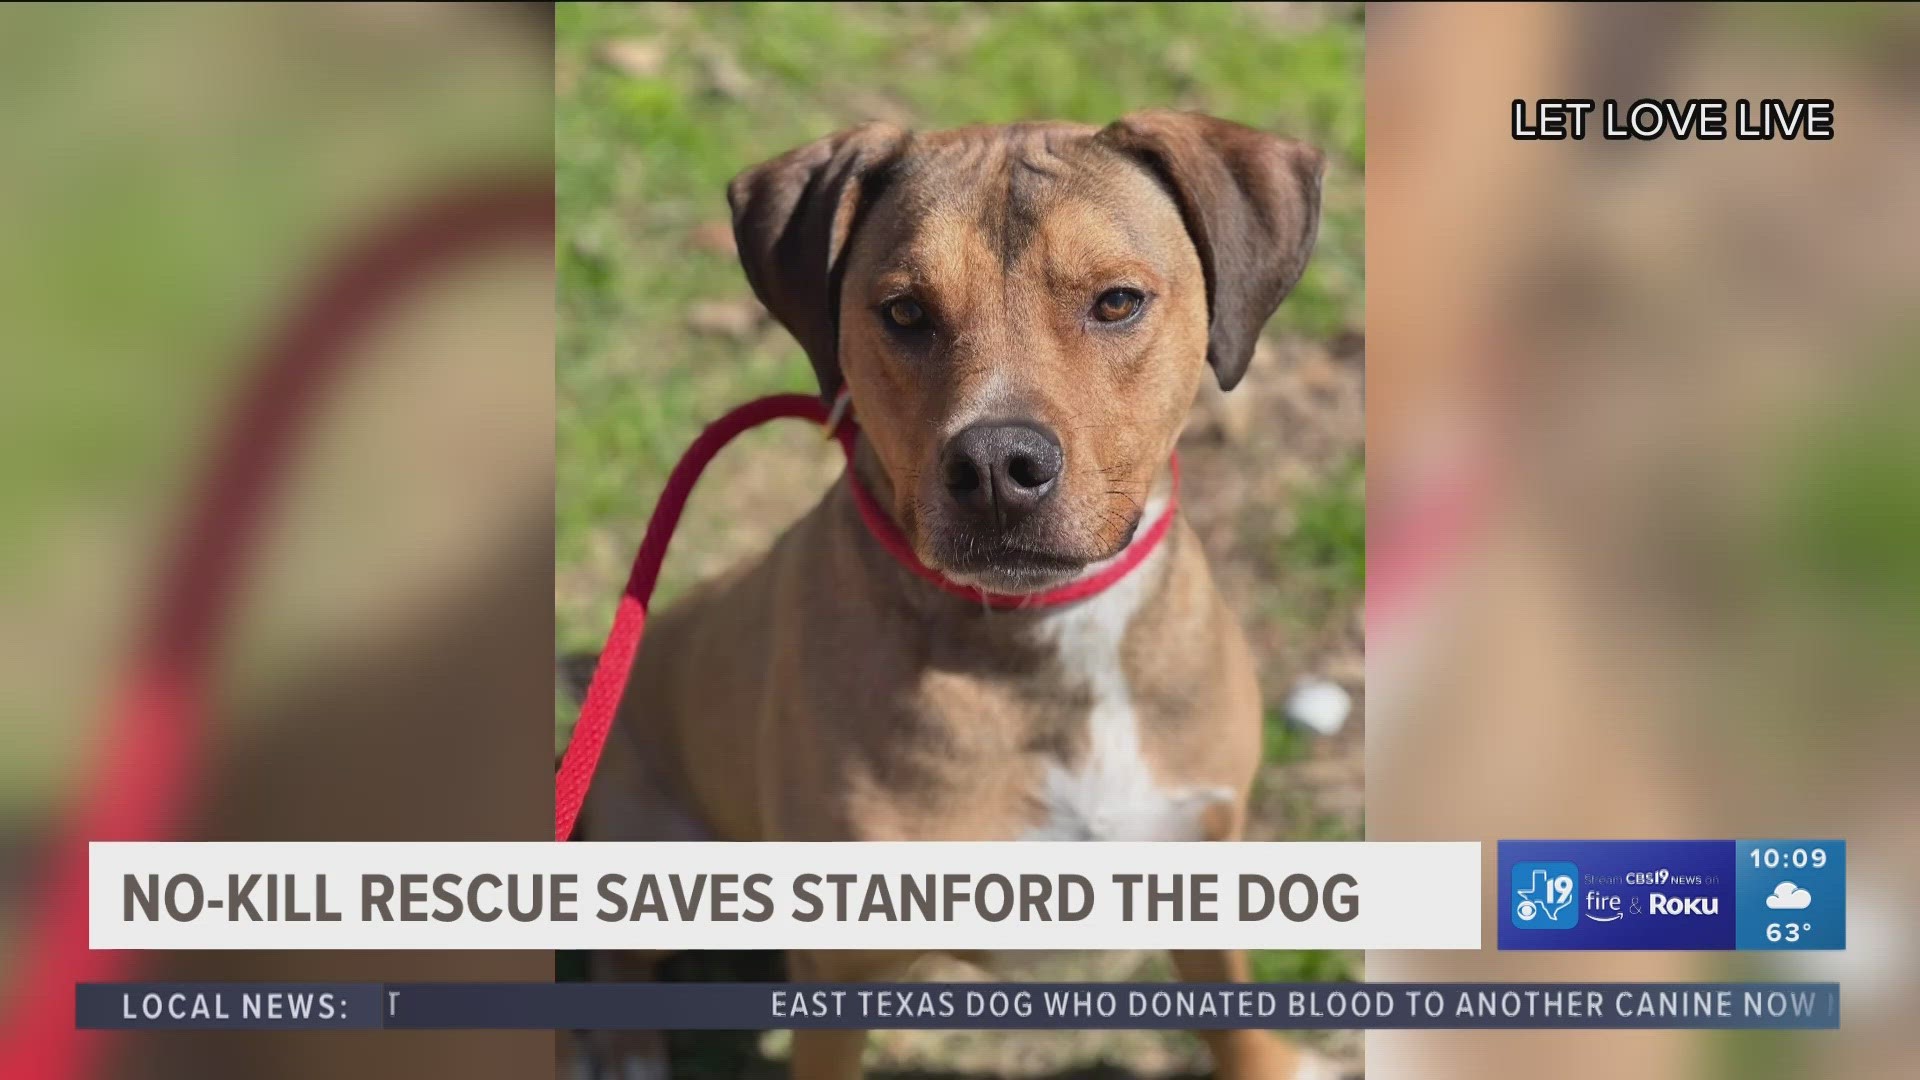 Stanford the dog now has a second chance at life after being rescued by Let Love Live.